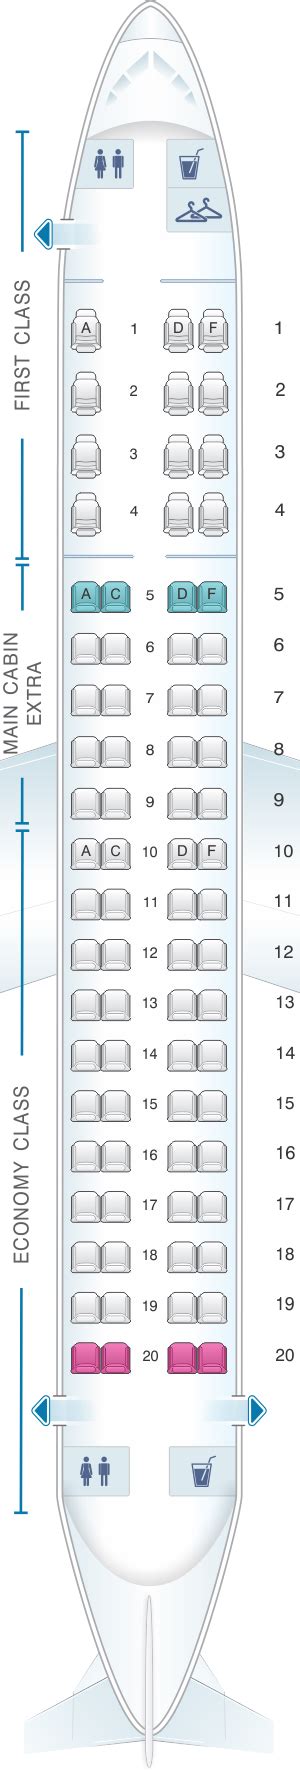 American Airlines Embraer 175 Seat Map; Seat 7a; American Airlines Reviews. Seating Charts · Airbus A319 · Airbus A319 (MCE) · Airbus A320 · Airbus A321 · Airbus A321 (transcon) · Airbus A321 (US Airways) · Airbus A330-200 · Airbus A330-300 · Boeing 737 MAX 8 · Boeing 737-800 · Boeing 737-800 (New MCE) · Boeing 757-200 · Boeing 757 .... 